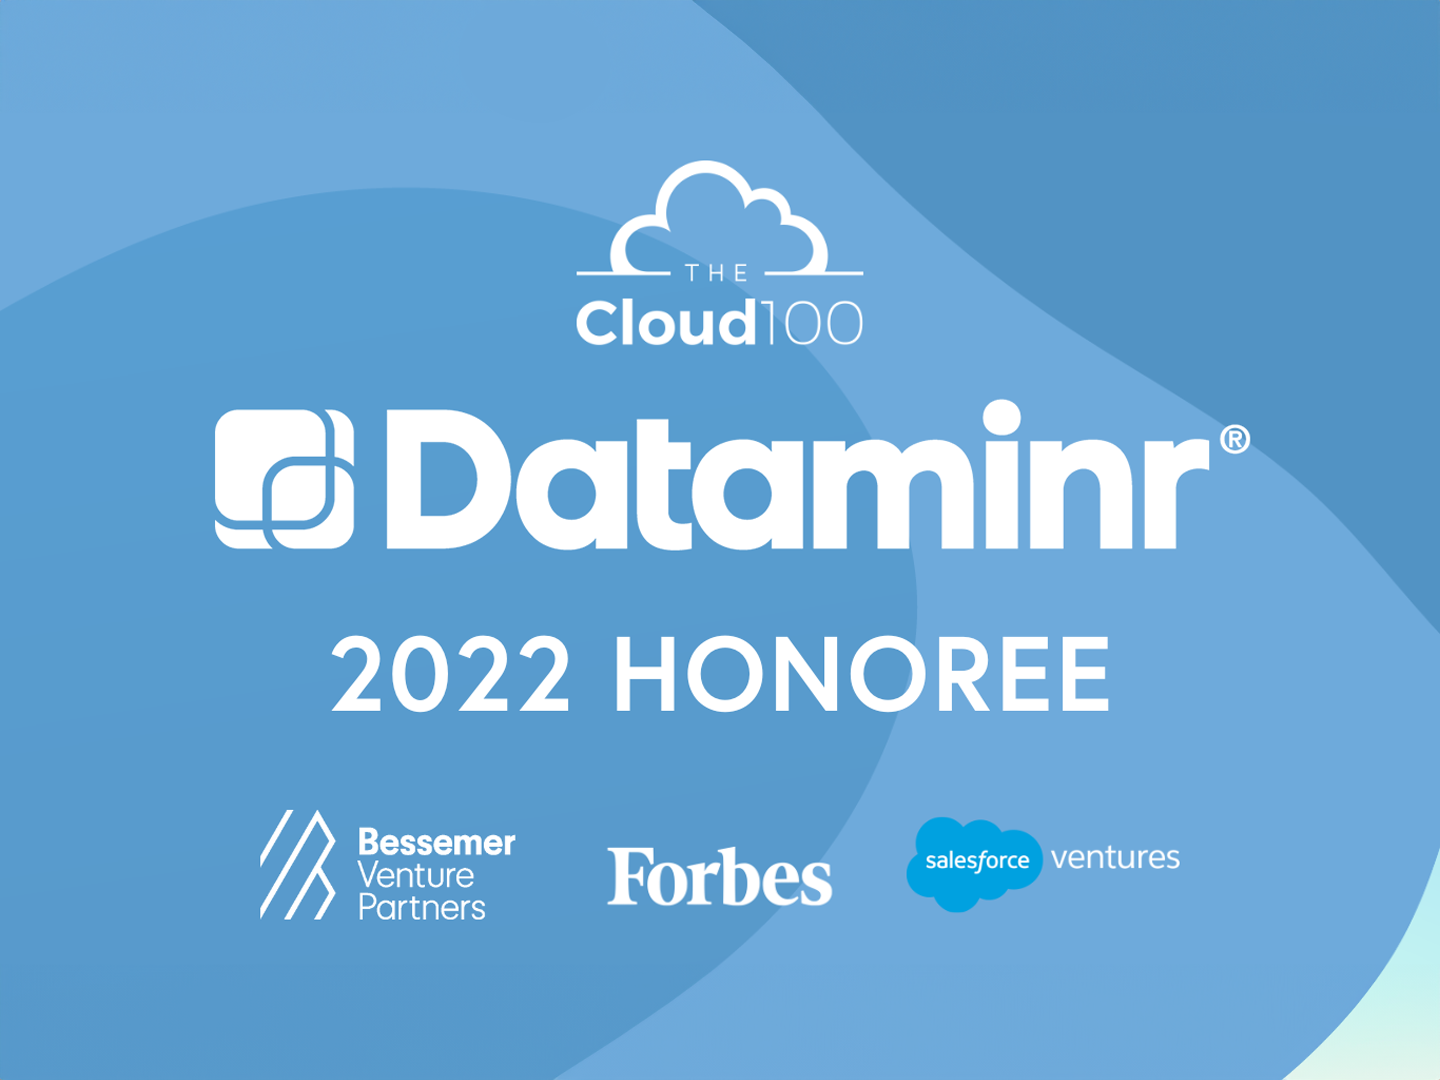 Dataminr Named to the 2022 Forbes Cloud 100